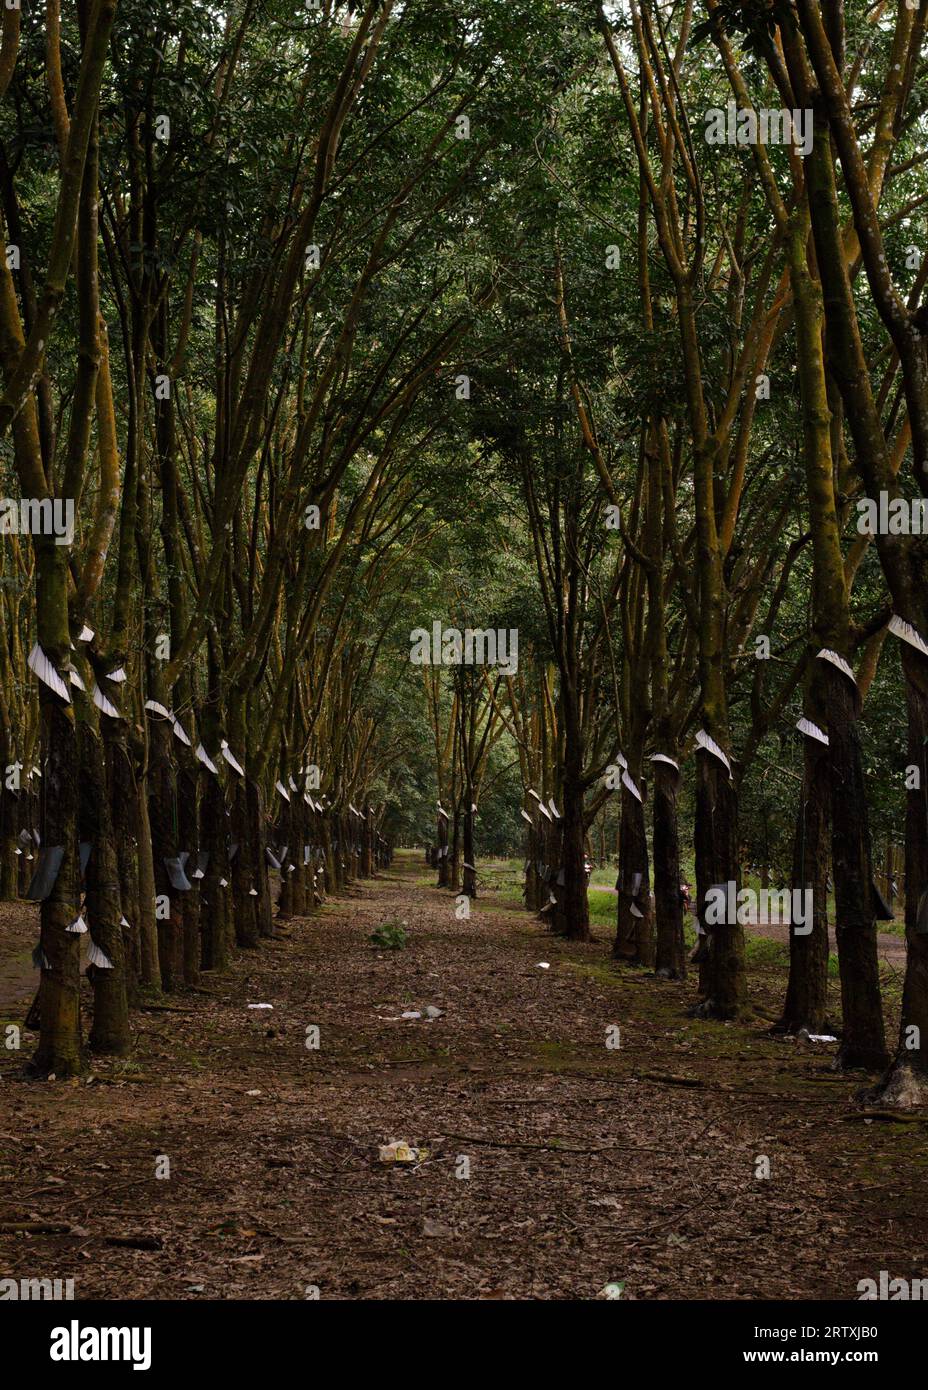 Rubber trees in rubber plantation Stock Photo